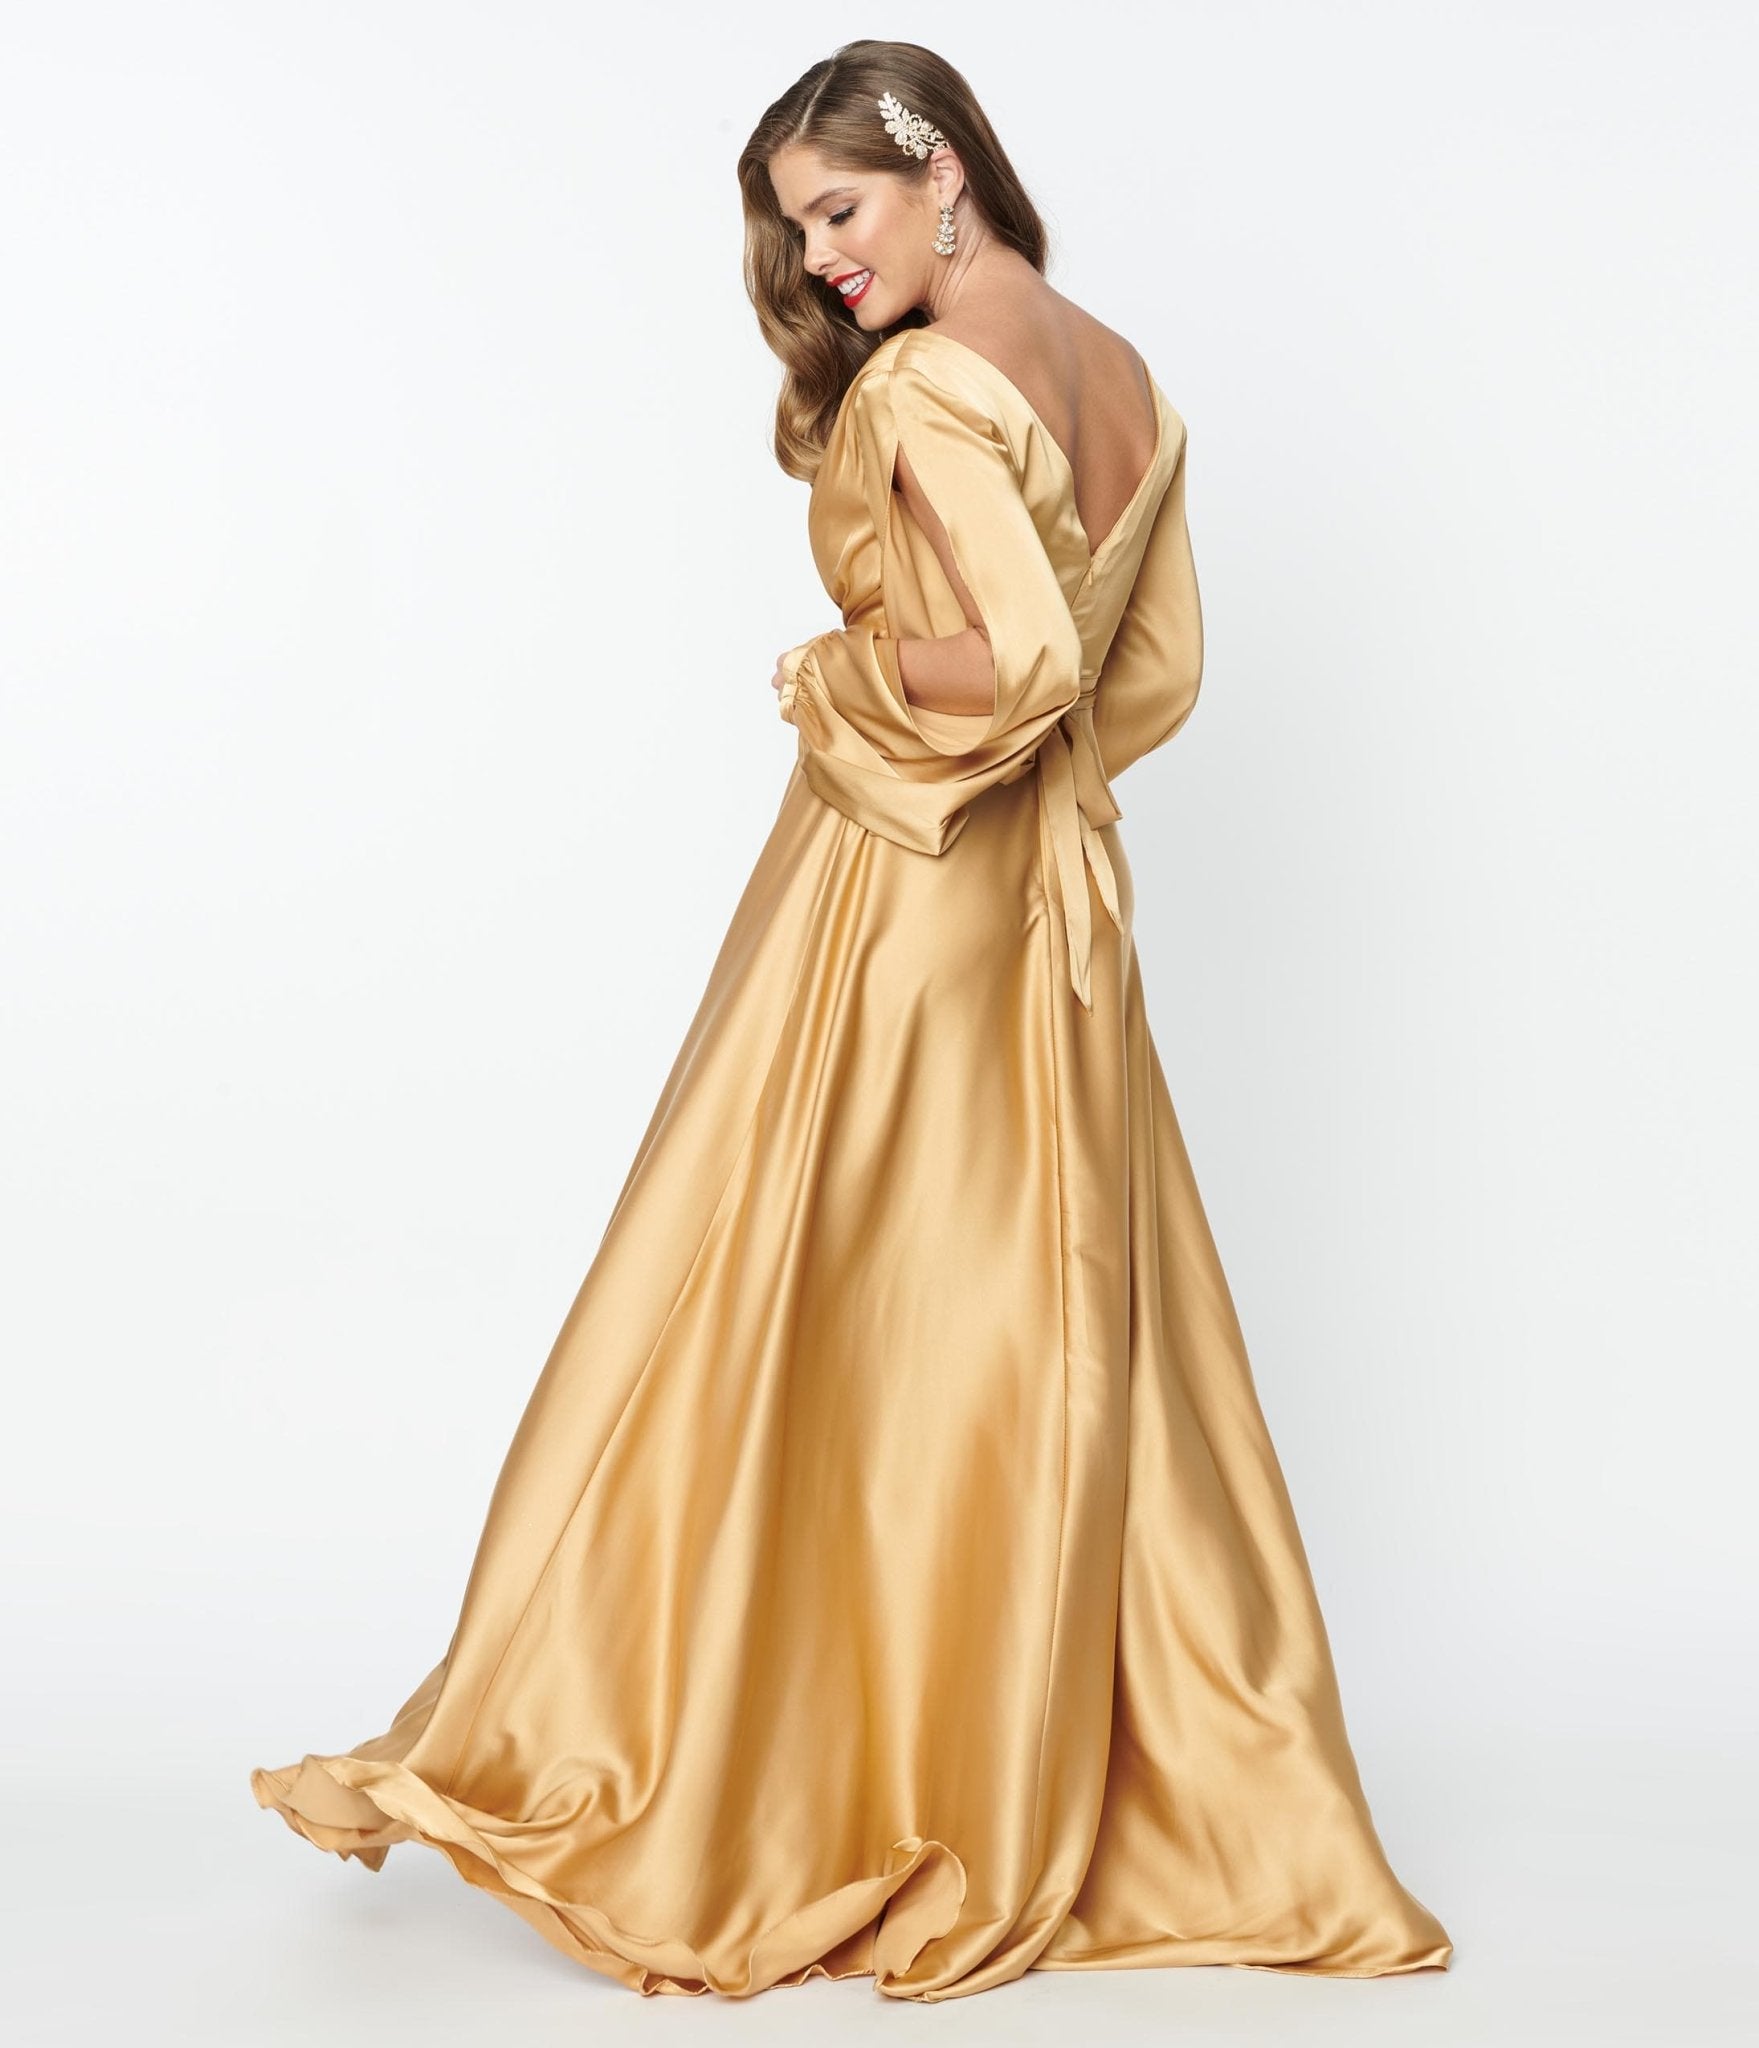 Gold Mermaid Gold Evening Gowns With 3D Lace Appliques, Sequins, And Beads  Sleeveless V Neck, Floor Length, Satin Fabric, Zipper Closure, Formal Gown  For Prom Or Party Plus Size Available From Dressvip,